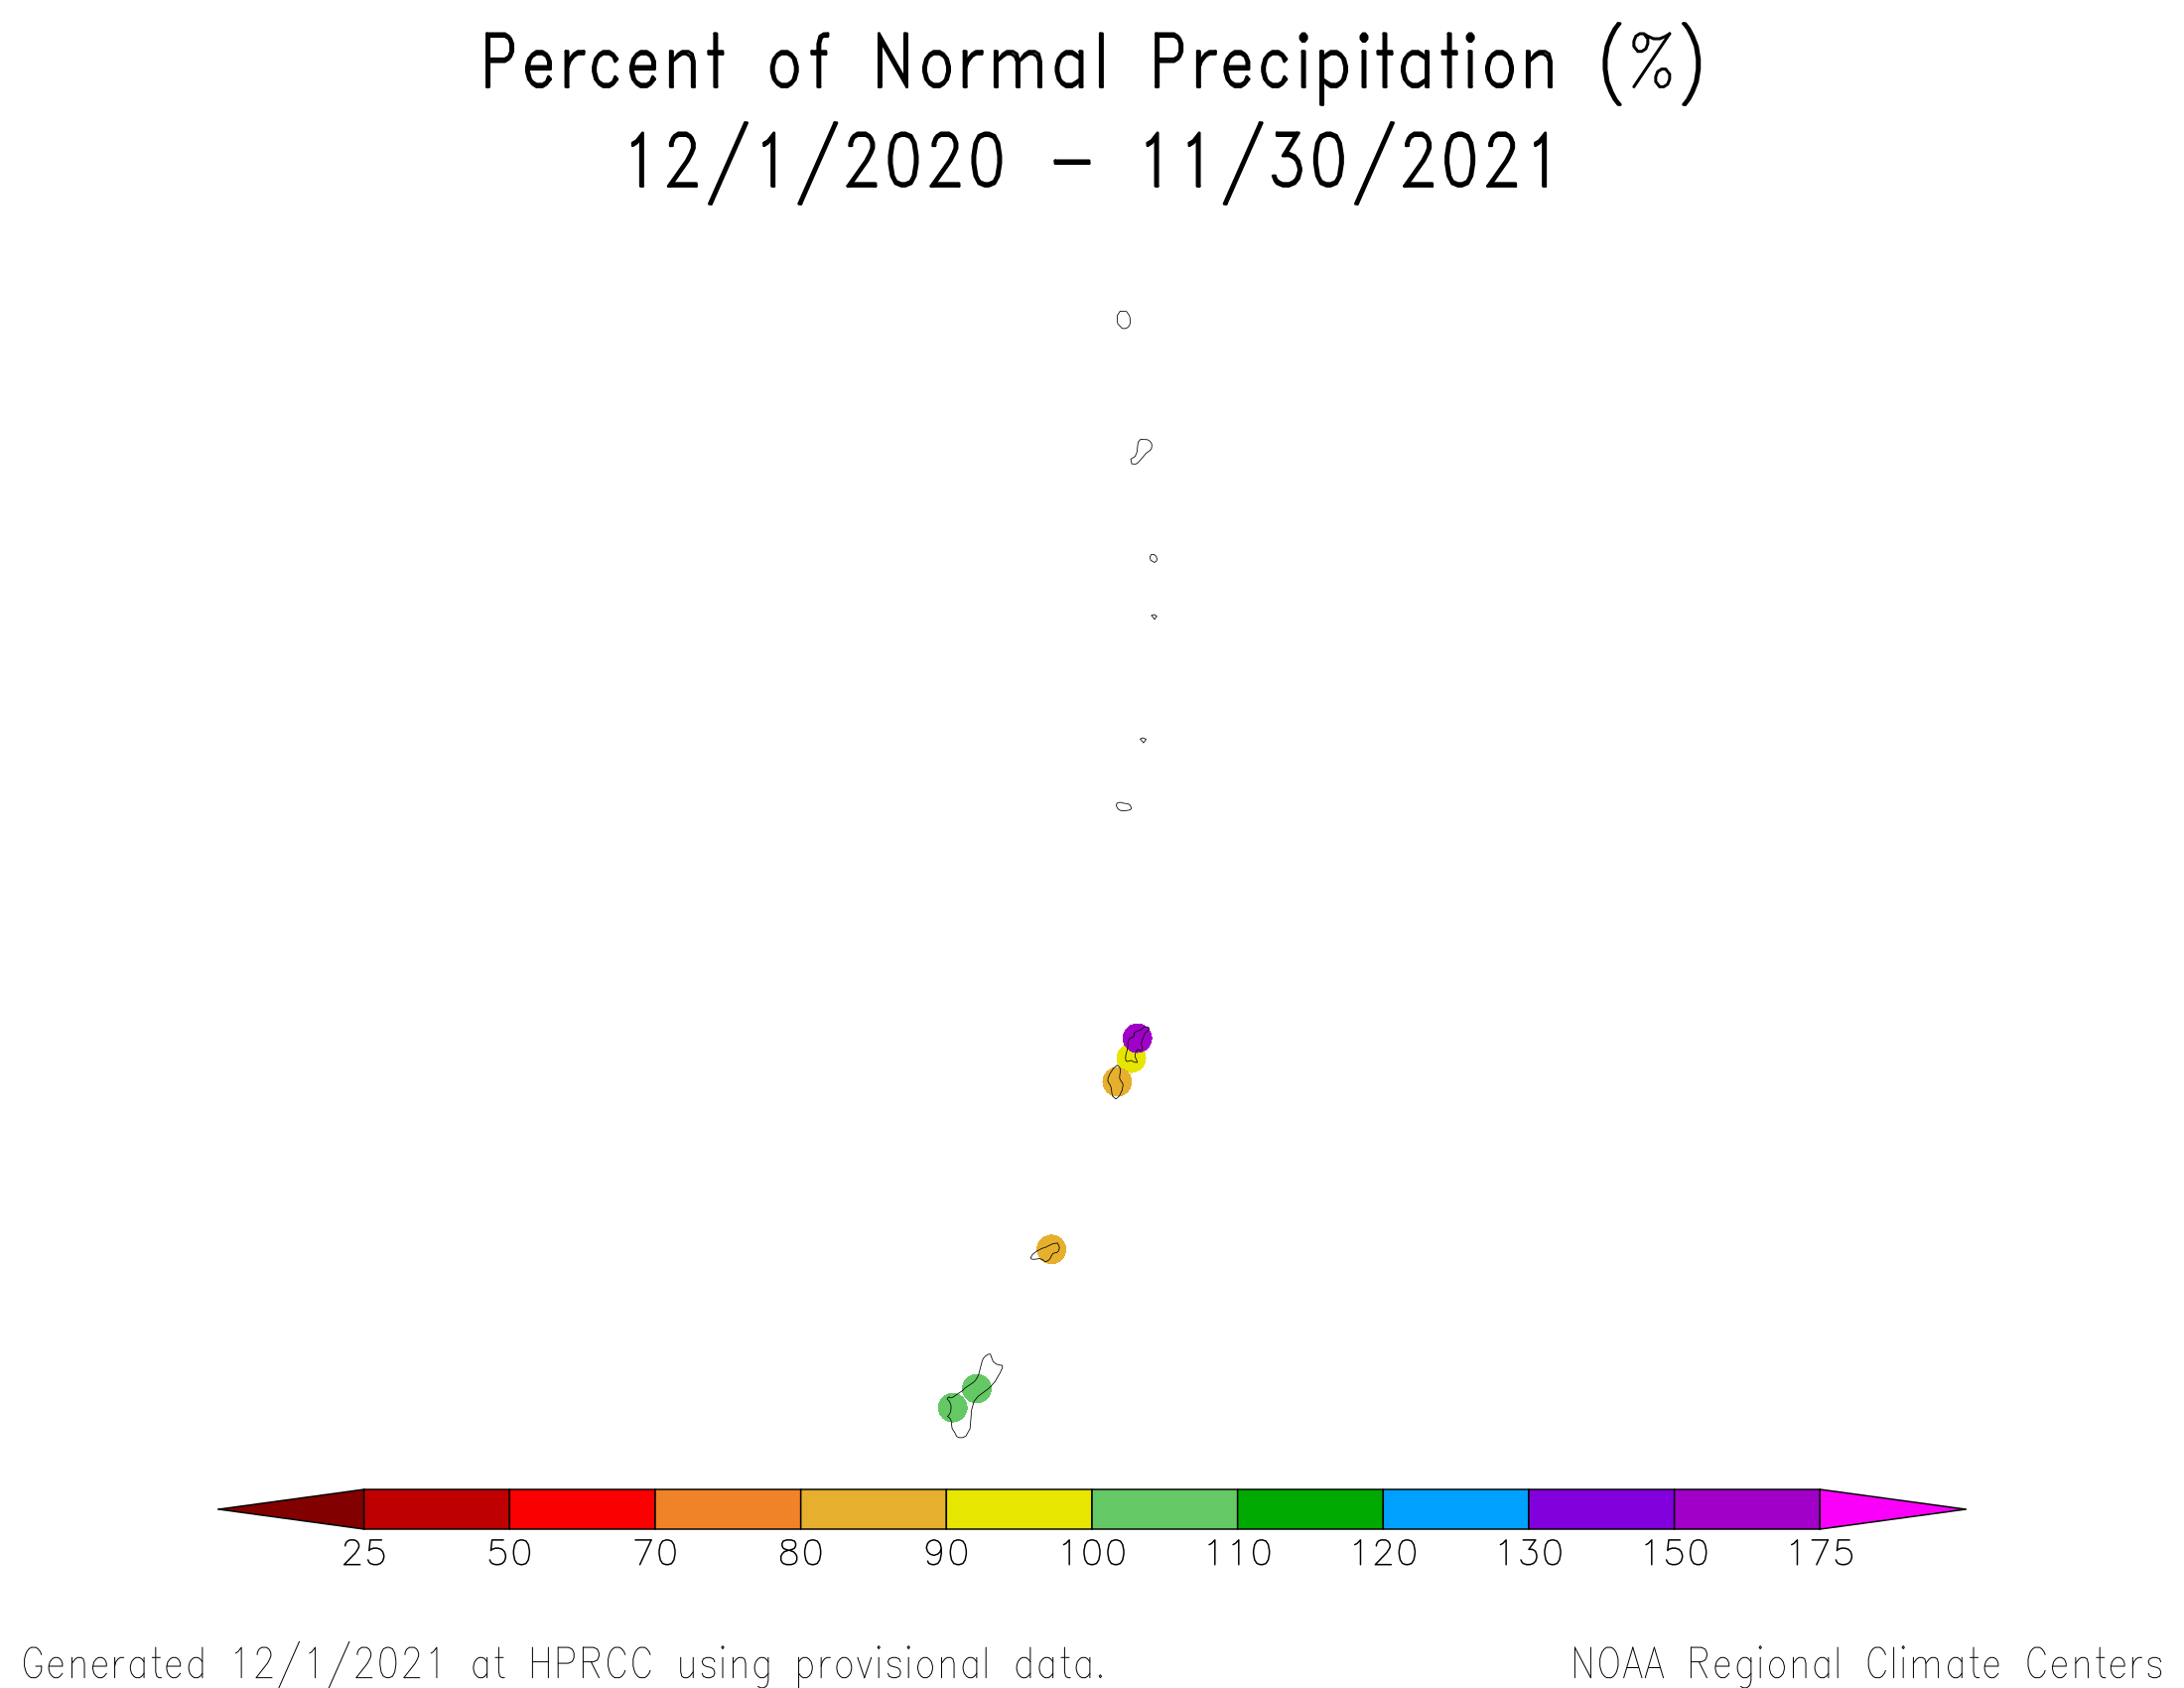 12-month Percent of Normal Precipitation for the Marianas